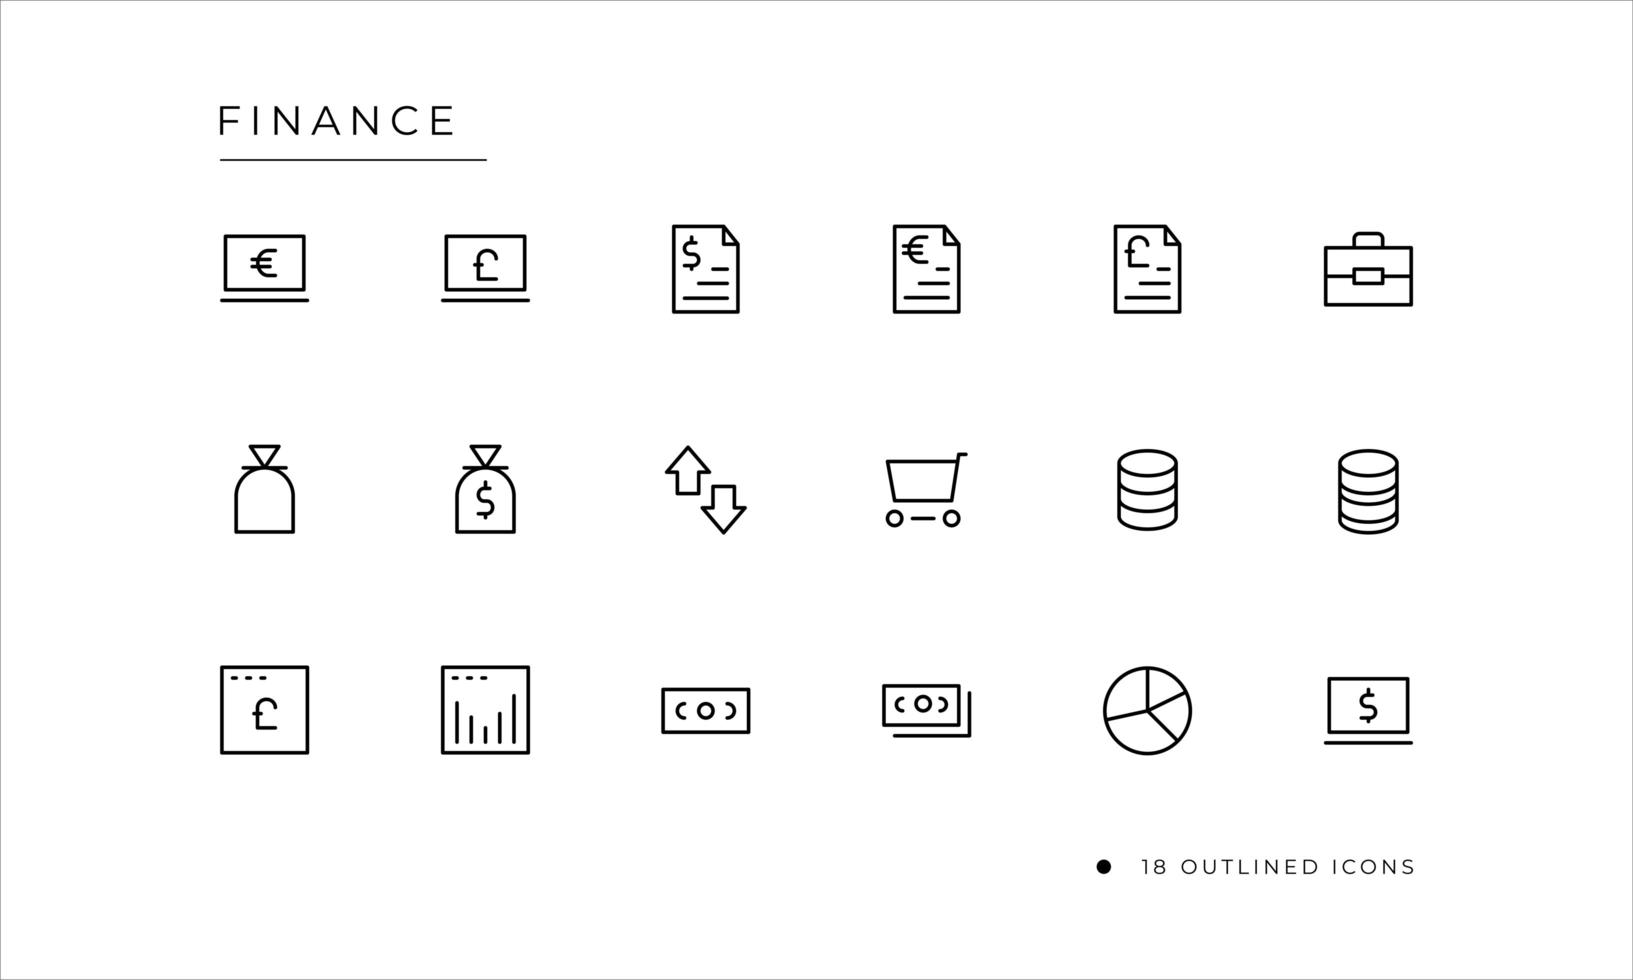 Finance icon set with outlined style vector